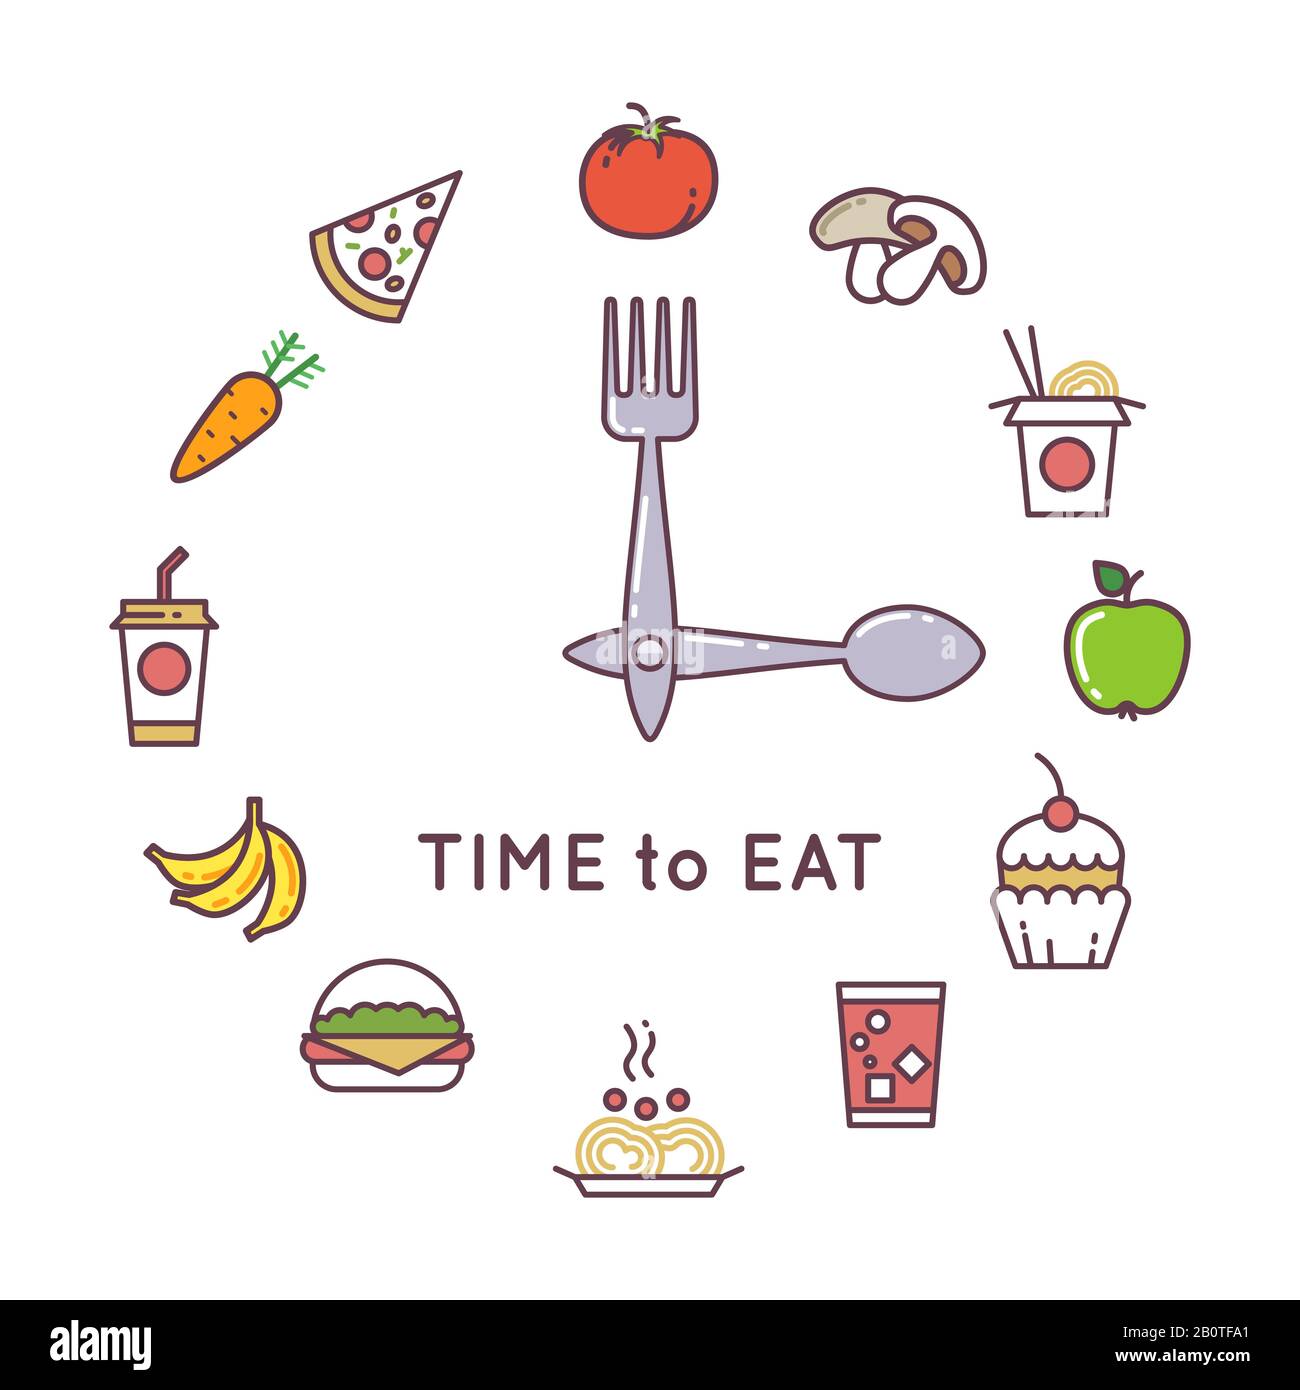 Weight loss diet vector concept with clock and food icons. Food clock concept lifestyle illustration Stock Vector